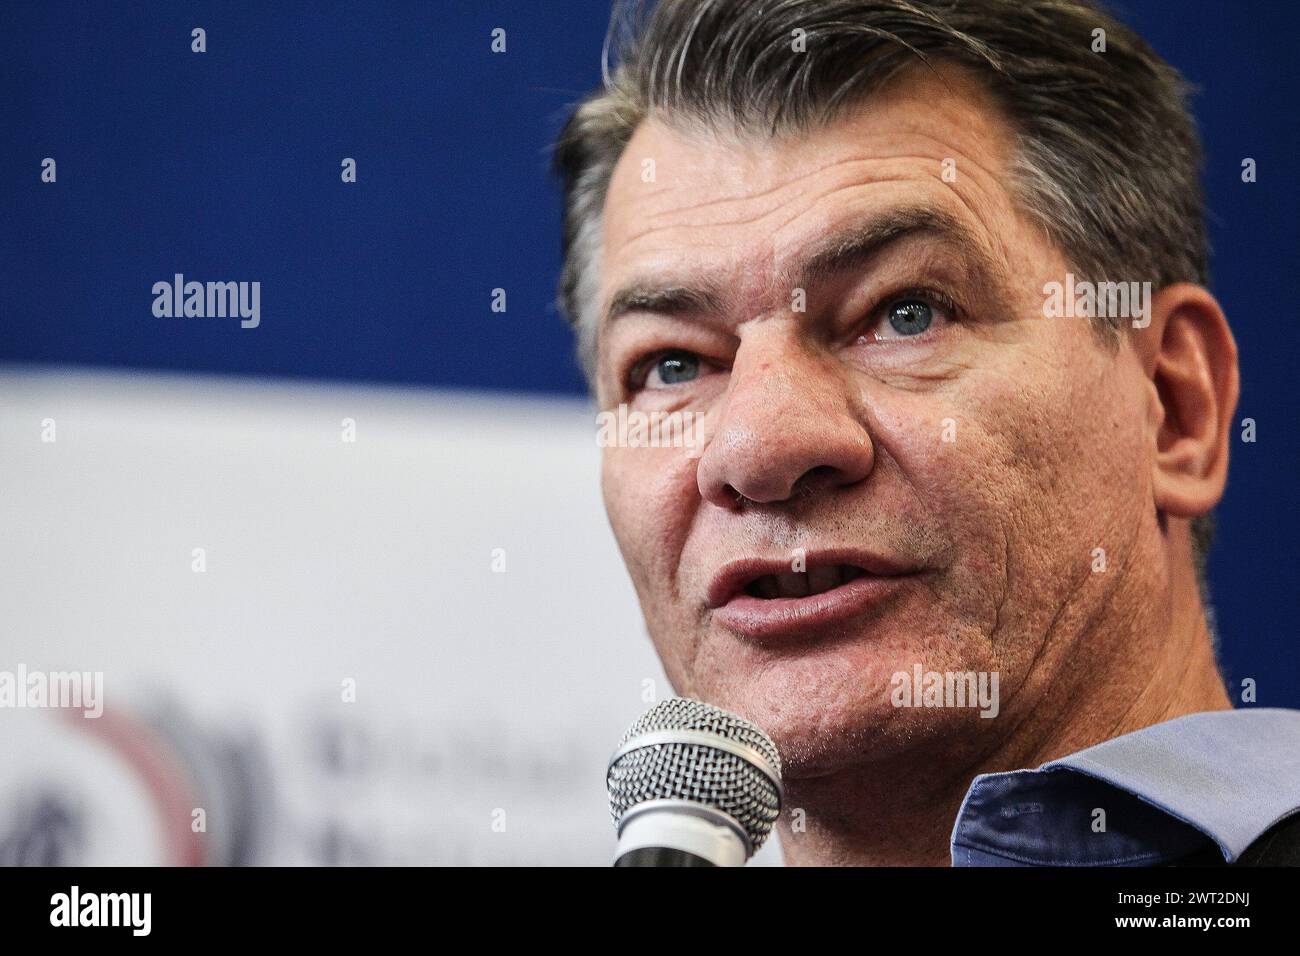 Paolo Nespoli, a famous italian astronaut, during a press conference Stock Photo